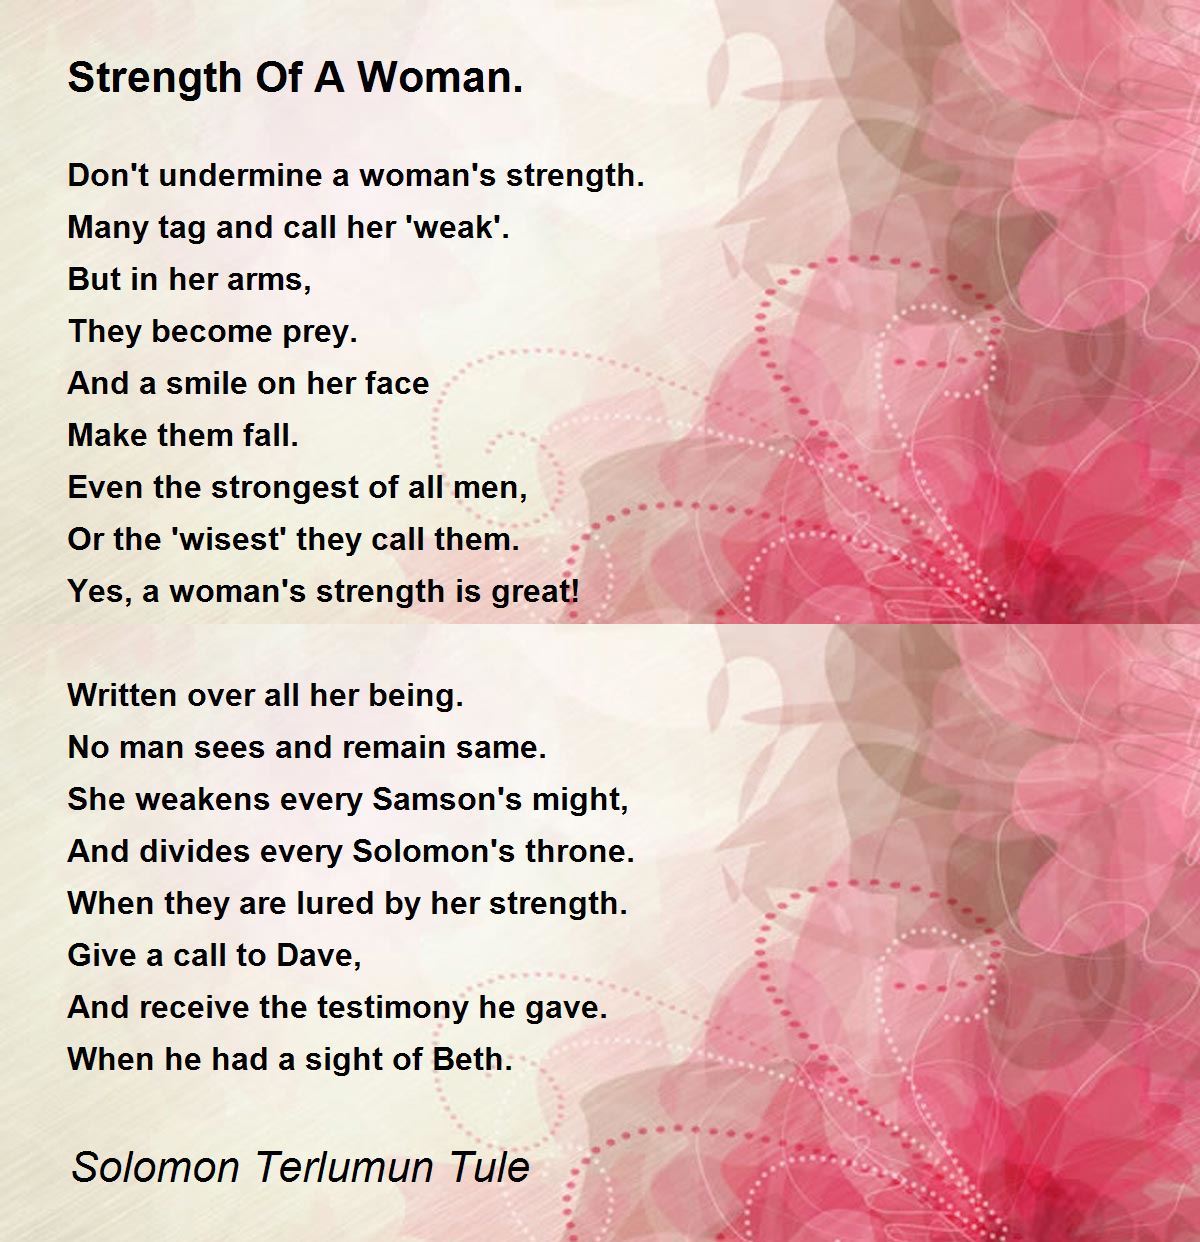 Strength Of A Woman. Strength Of A Woman. Poem by Solomon Terlumun Tule